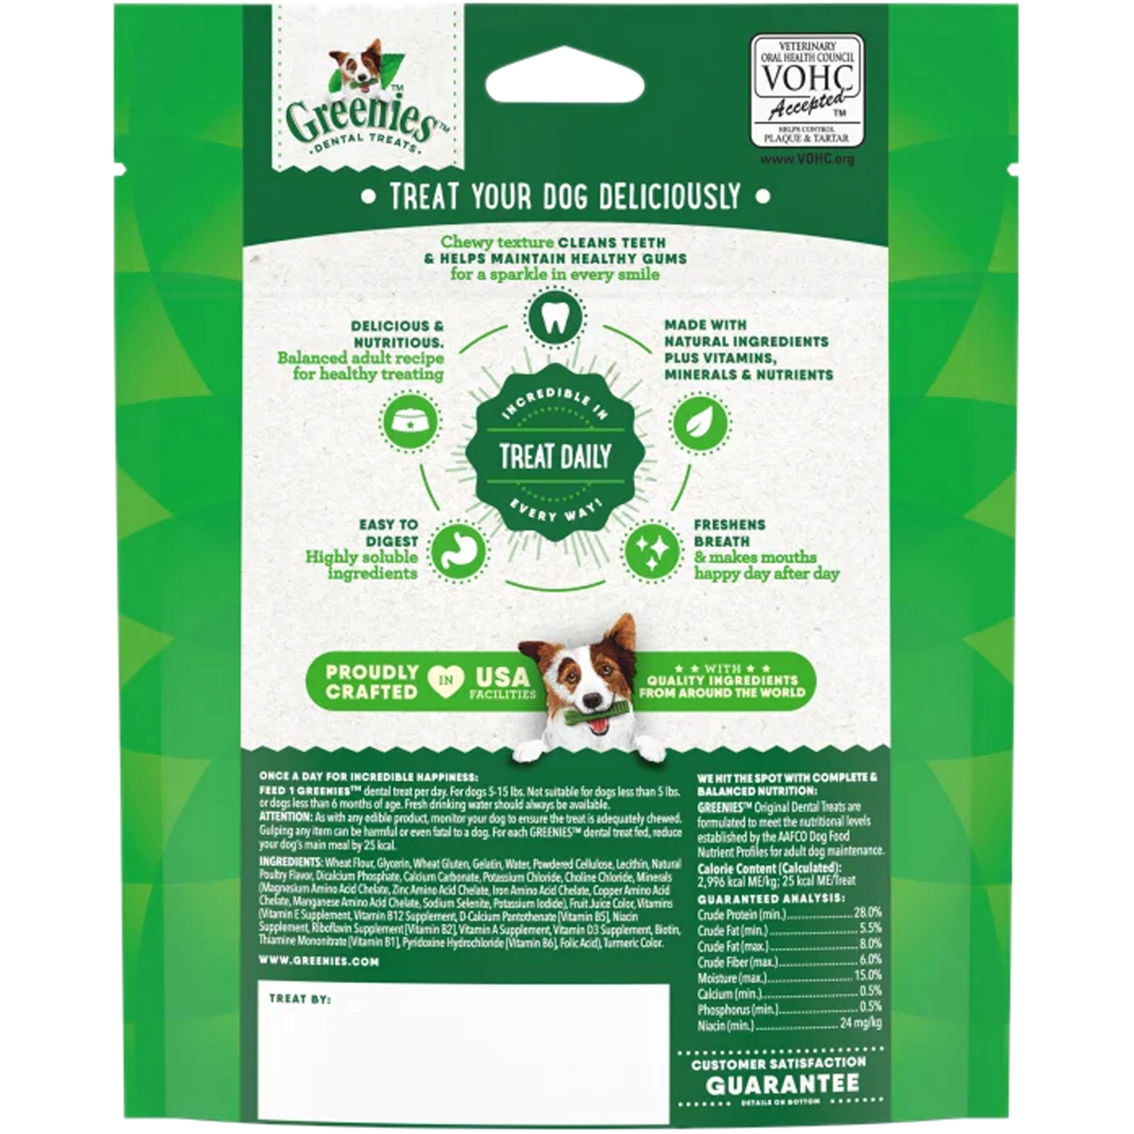 Greenies Canine Dental Chew Treats for Dogs - Image 2 of 2